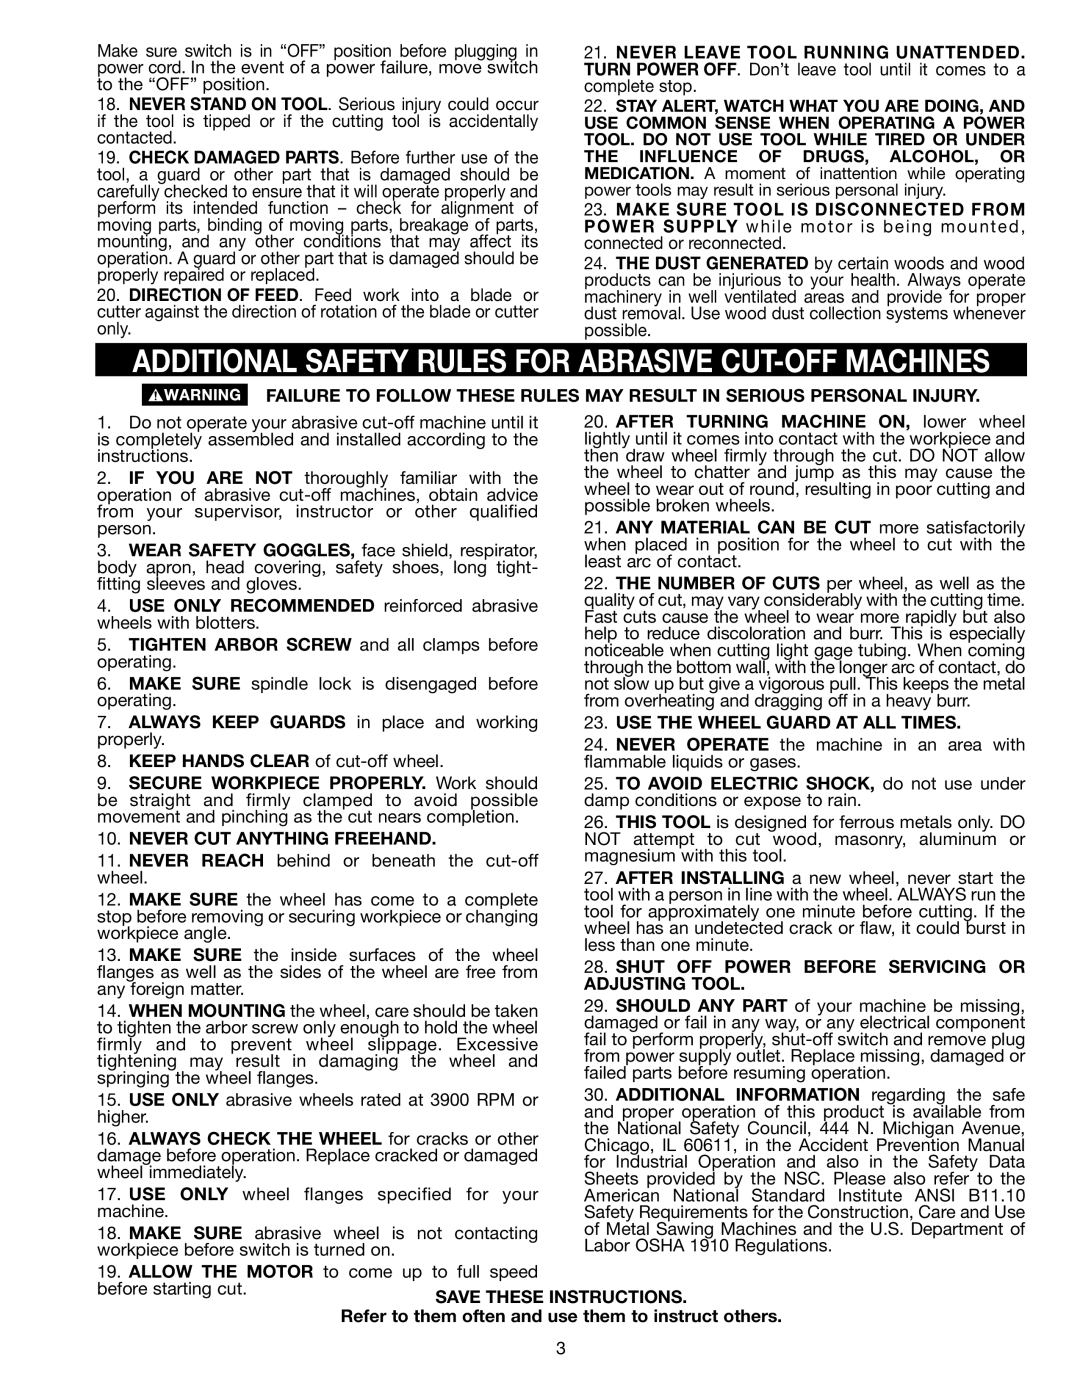 Porter-Cable 1400, 909516 instruction manual Additional Safety Rules For Abrasive Cut-Off Machines 